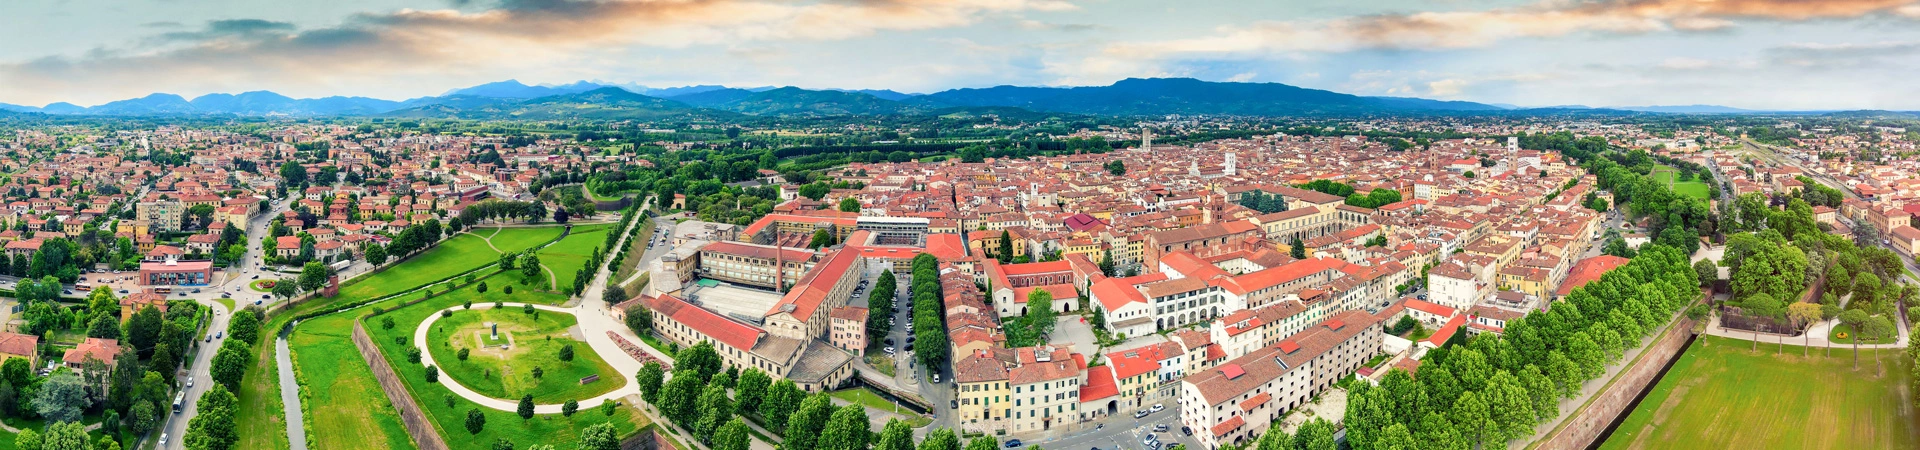 Lucca (Italy) city overview